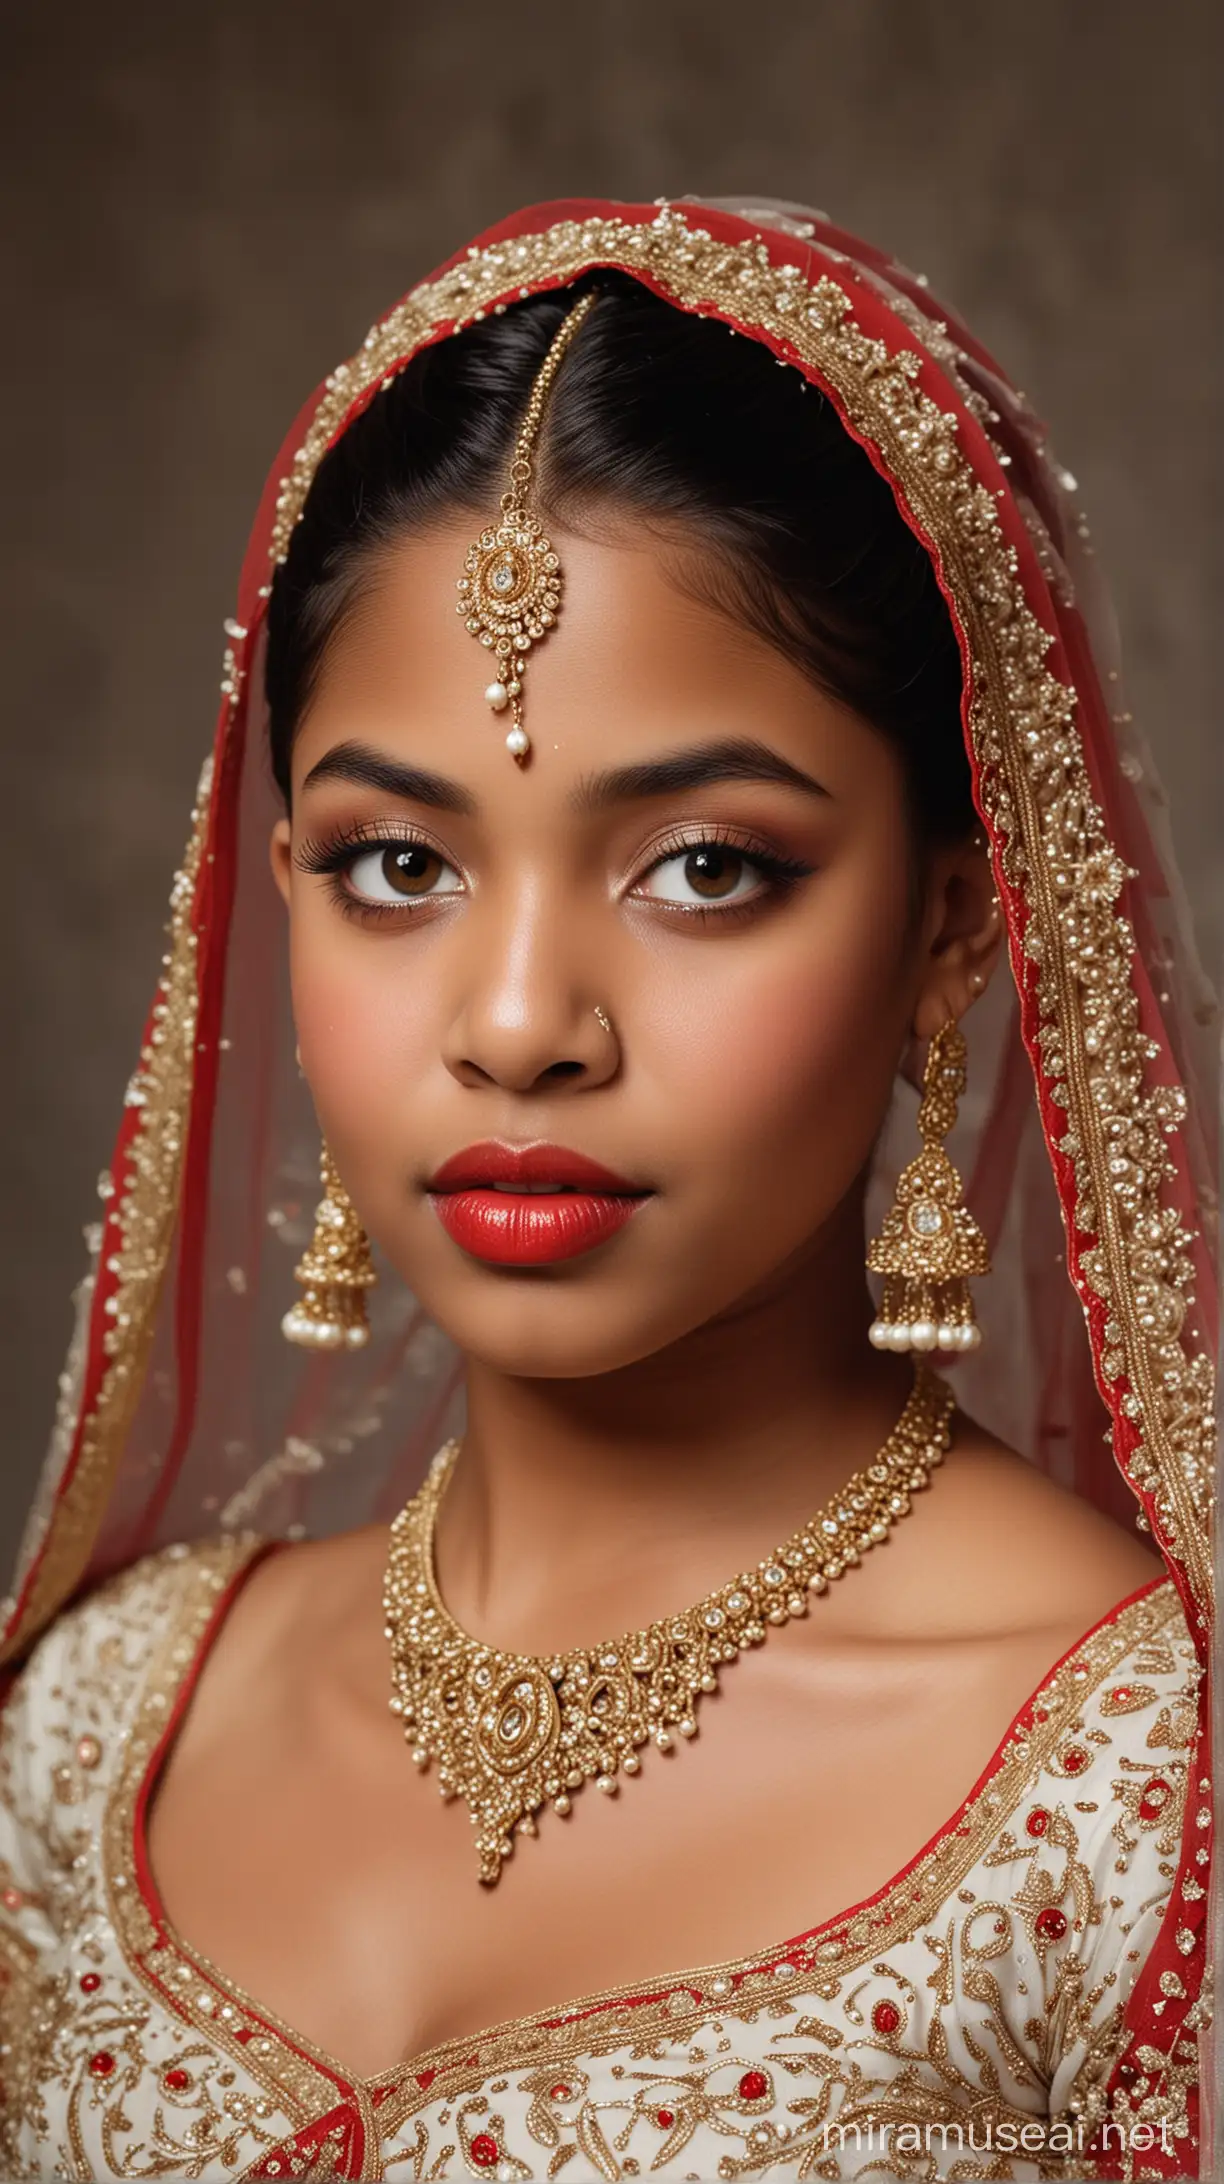 A 12 year old fat black girl with small eyes, wide red lips, weak chin, small nose and long straight black hair with a bun at back wearing an Indian bridal gown with a veil on head